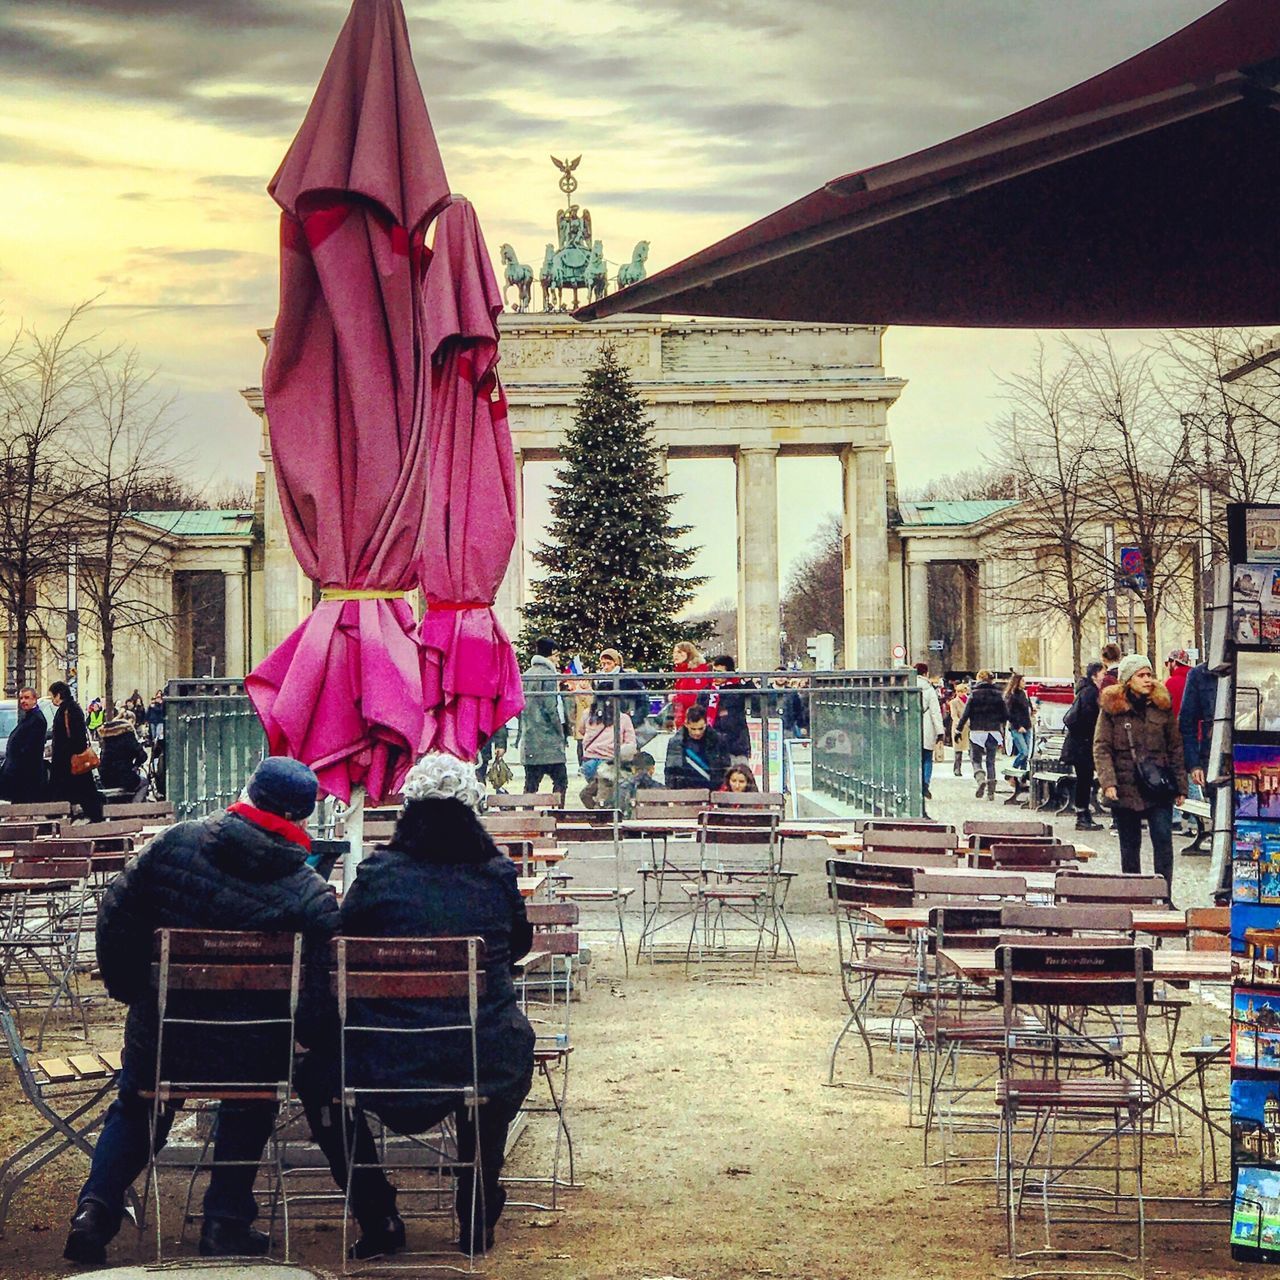 REAR VIEW OF PEOPLE IN TOWN SQUARE